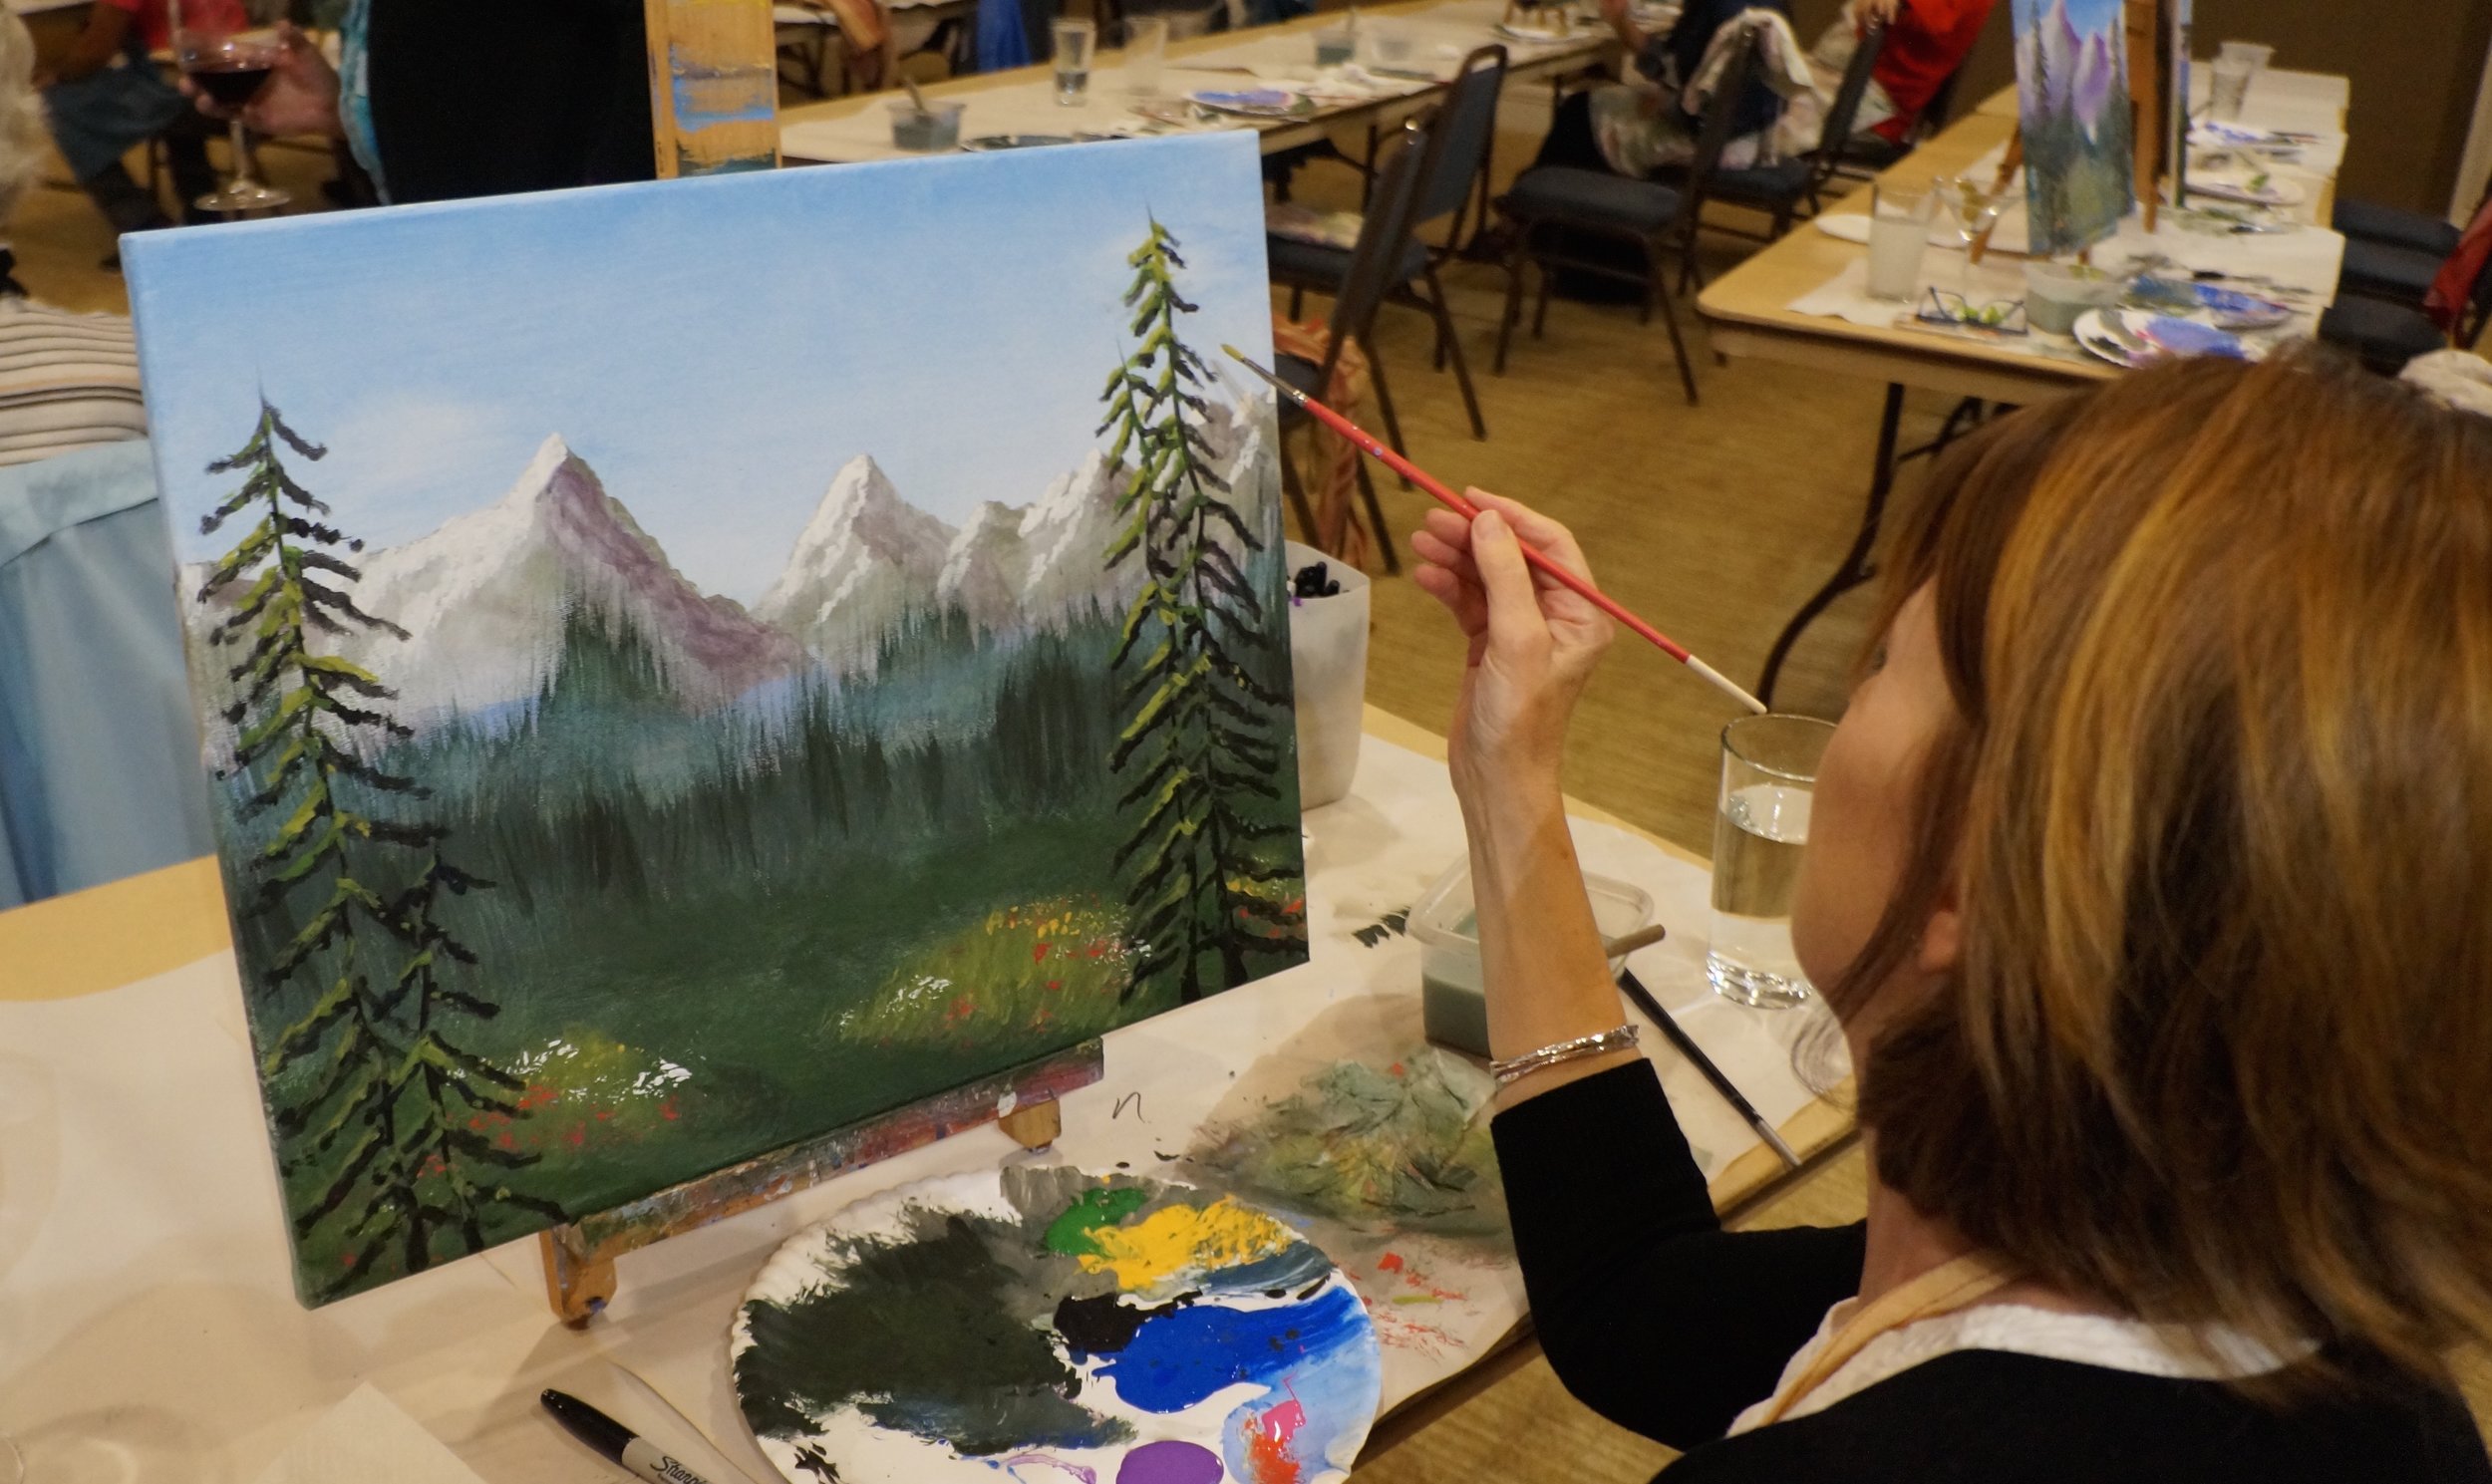   PAINTING CLASSES    Learn more  